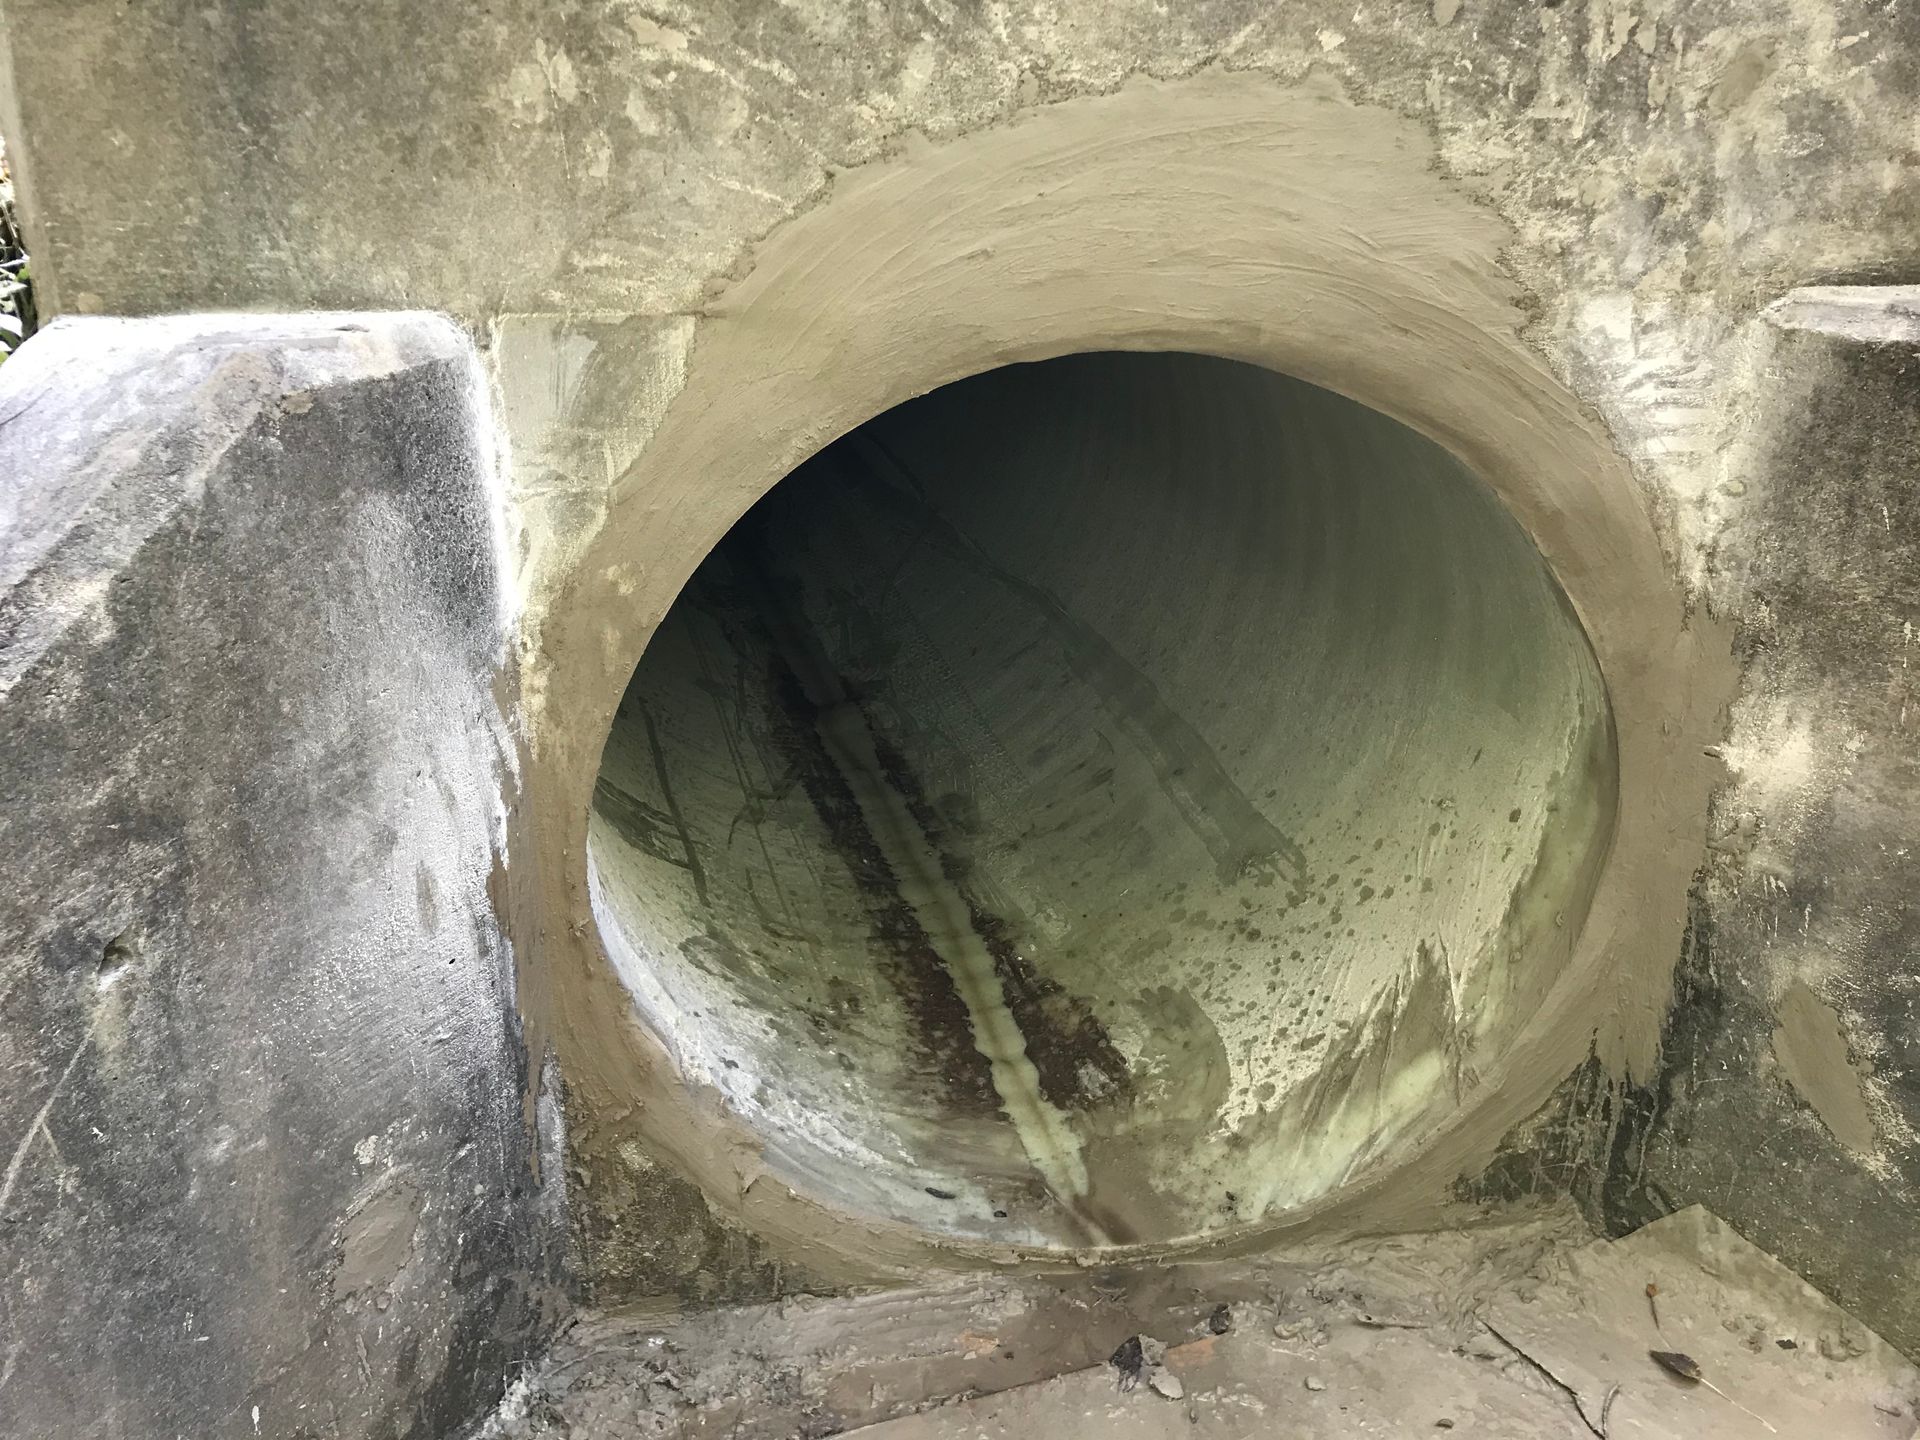 Finished CIPP pipe rehab for storm water asset